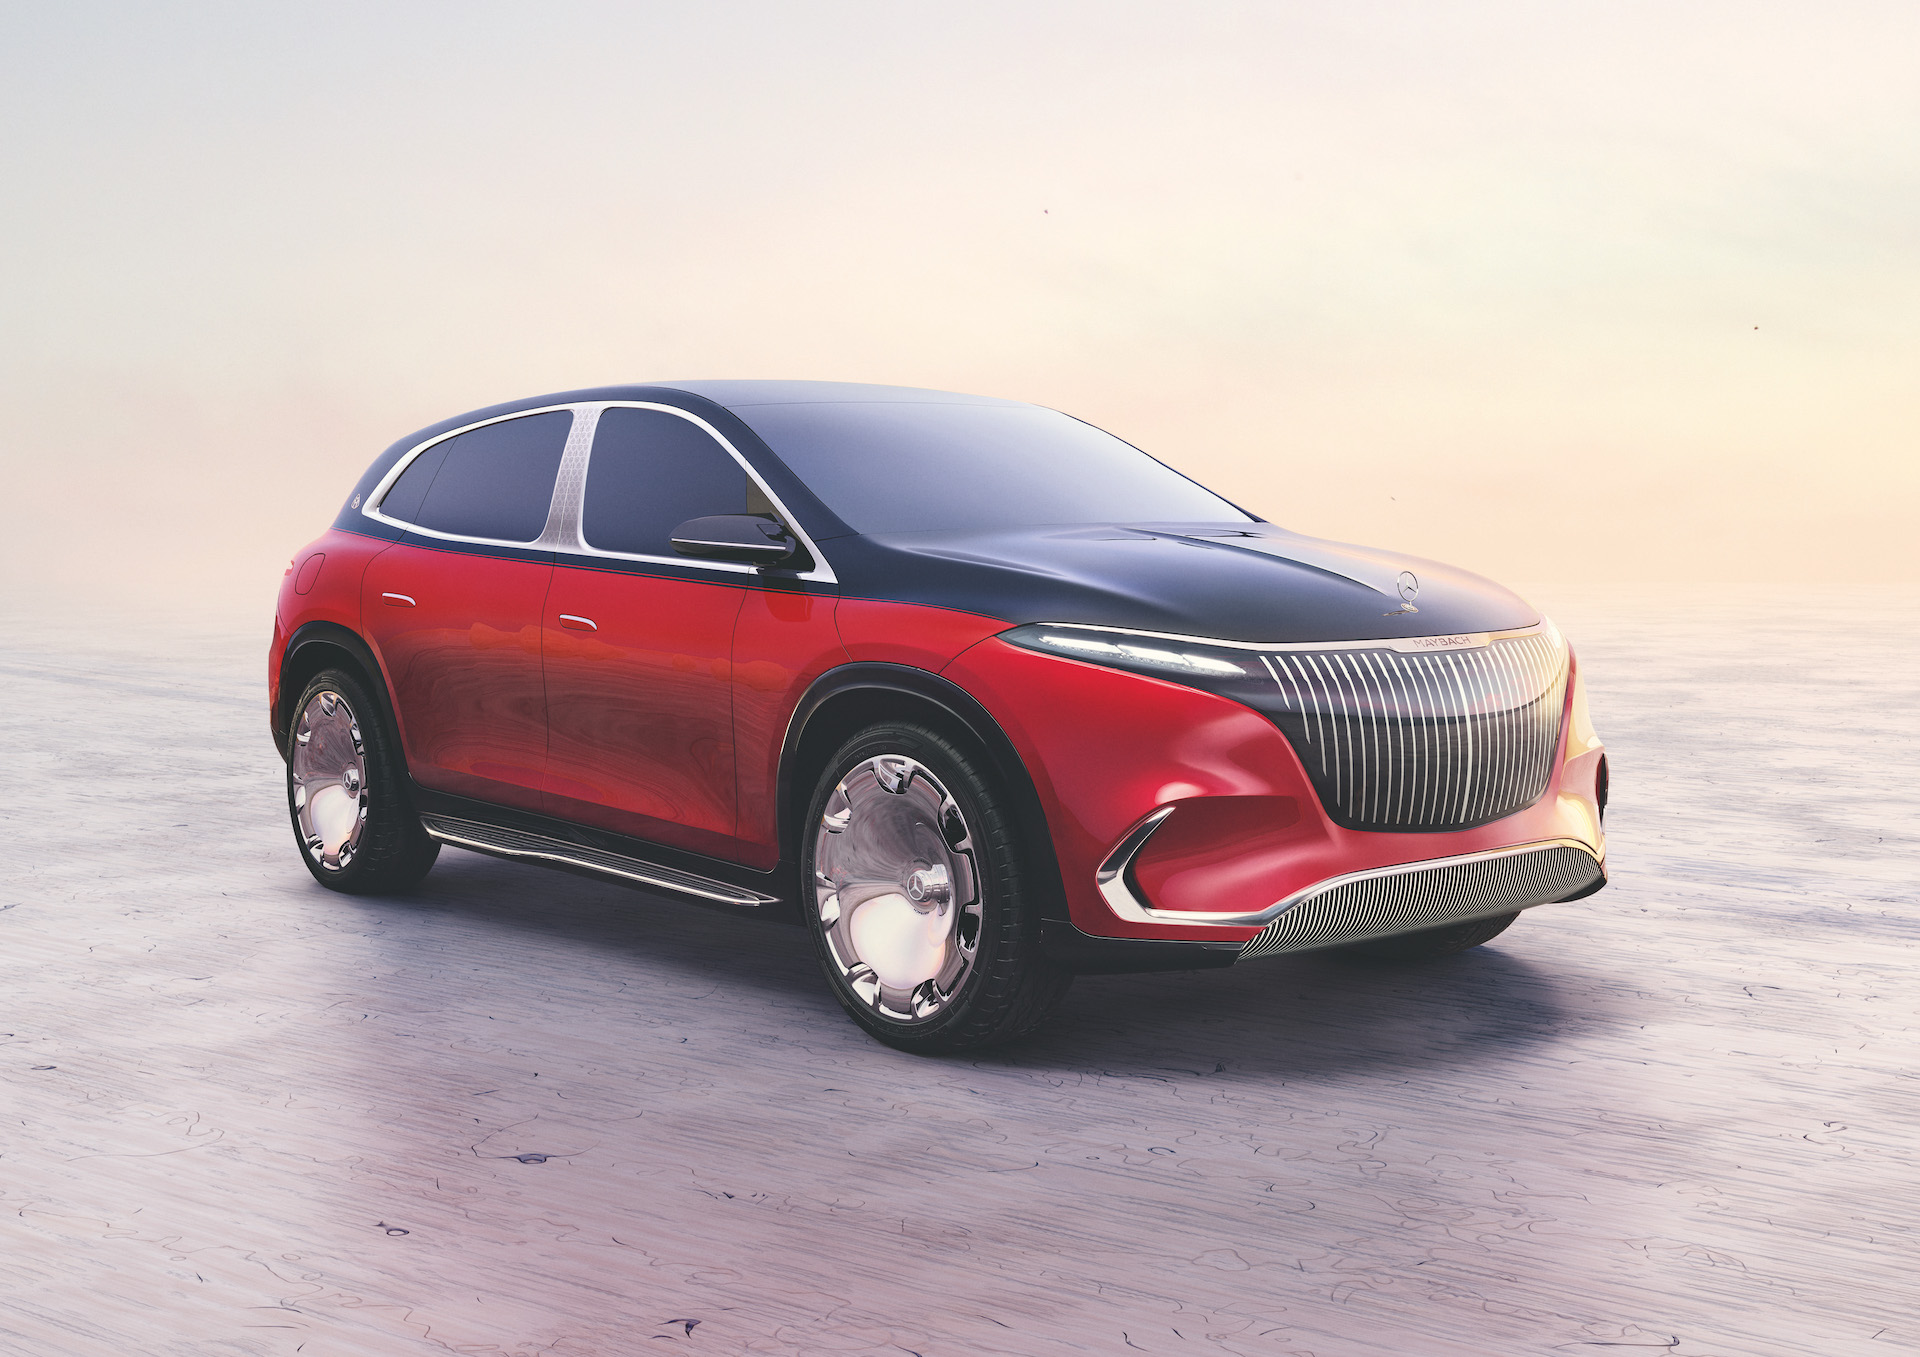 Mercedes-Maybach EQS concept presents its future electric SUV in super-lux formMercedes-Maybach EQS concept presents its future electric SUV in super-lux form